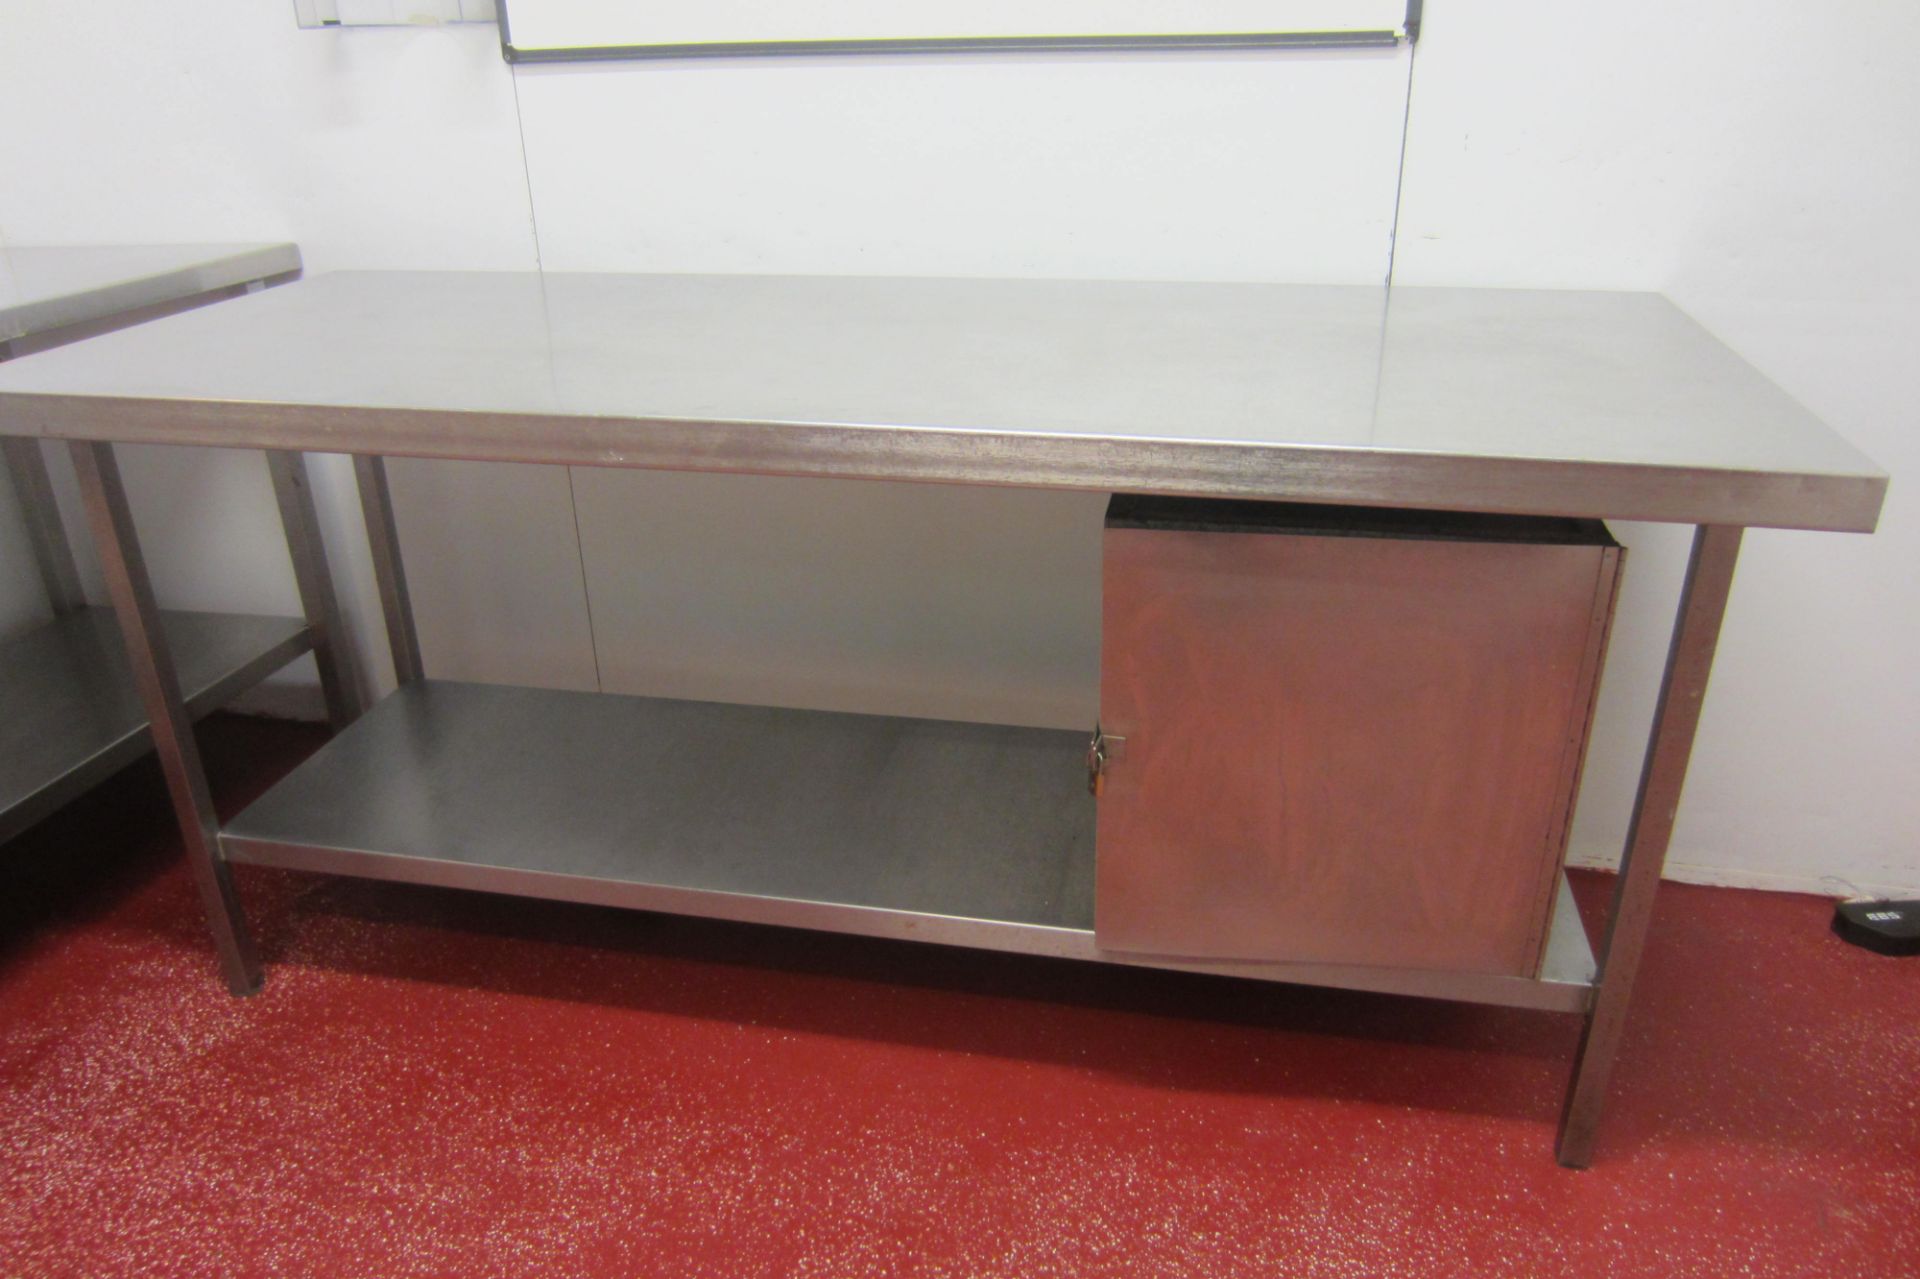 4 x Stainless Steel Prep/Work Tables with Shelves Under. Size 1 x 175cm x 70cm, 1 x 180cm x 70cm, - Image 5 of 6